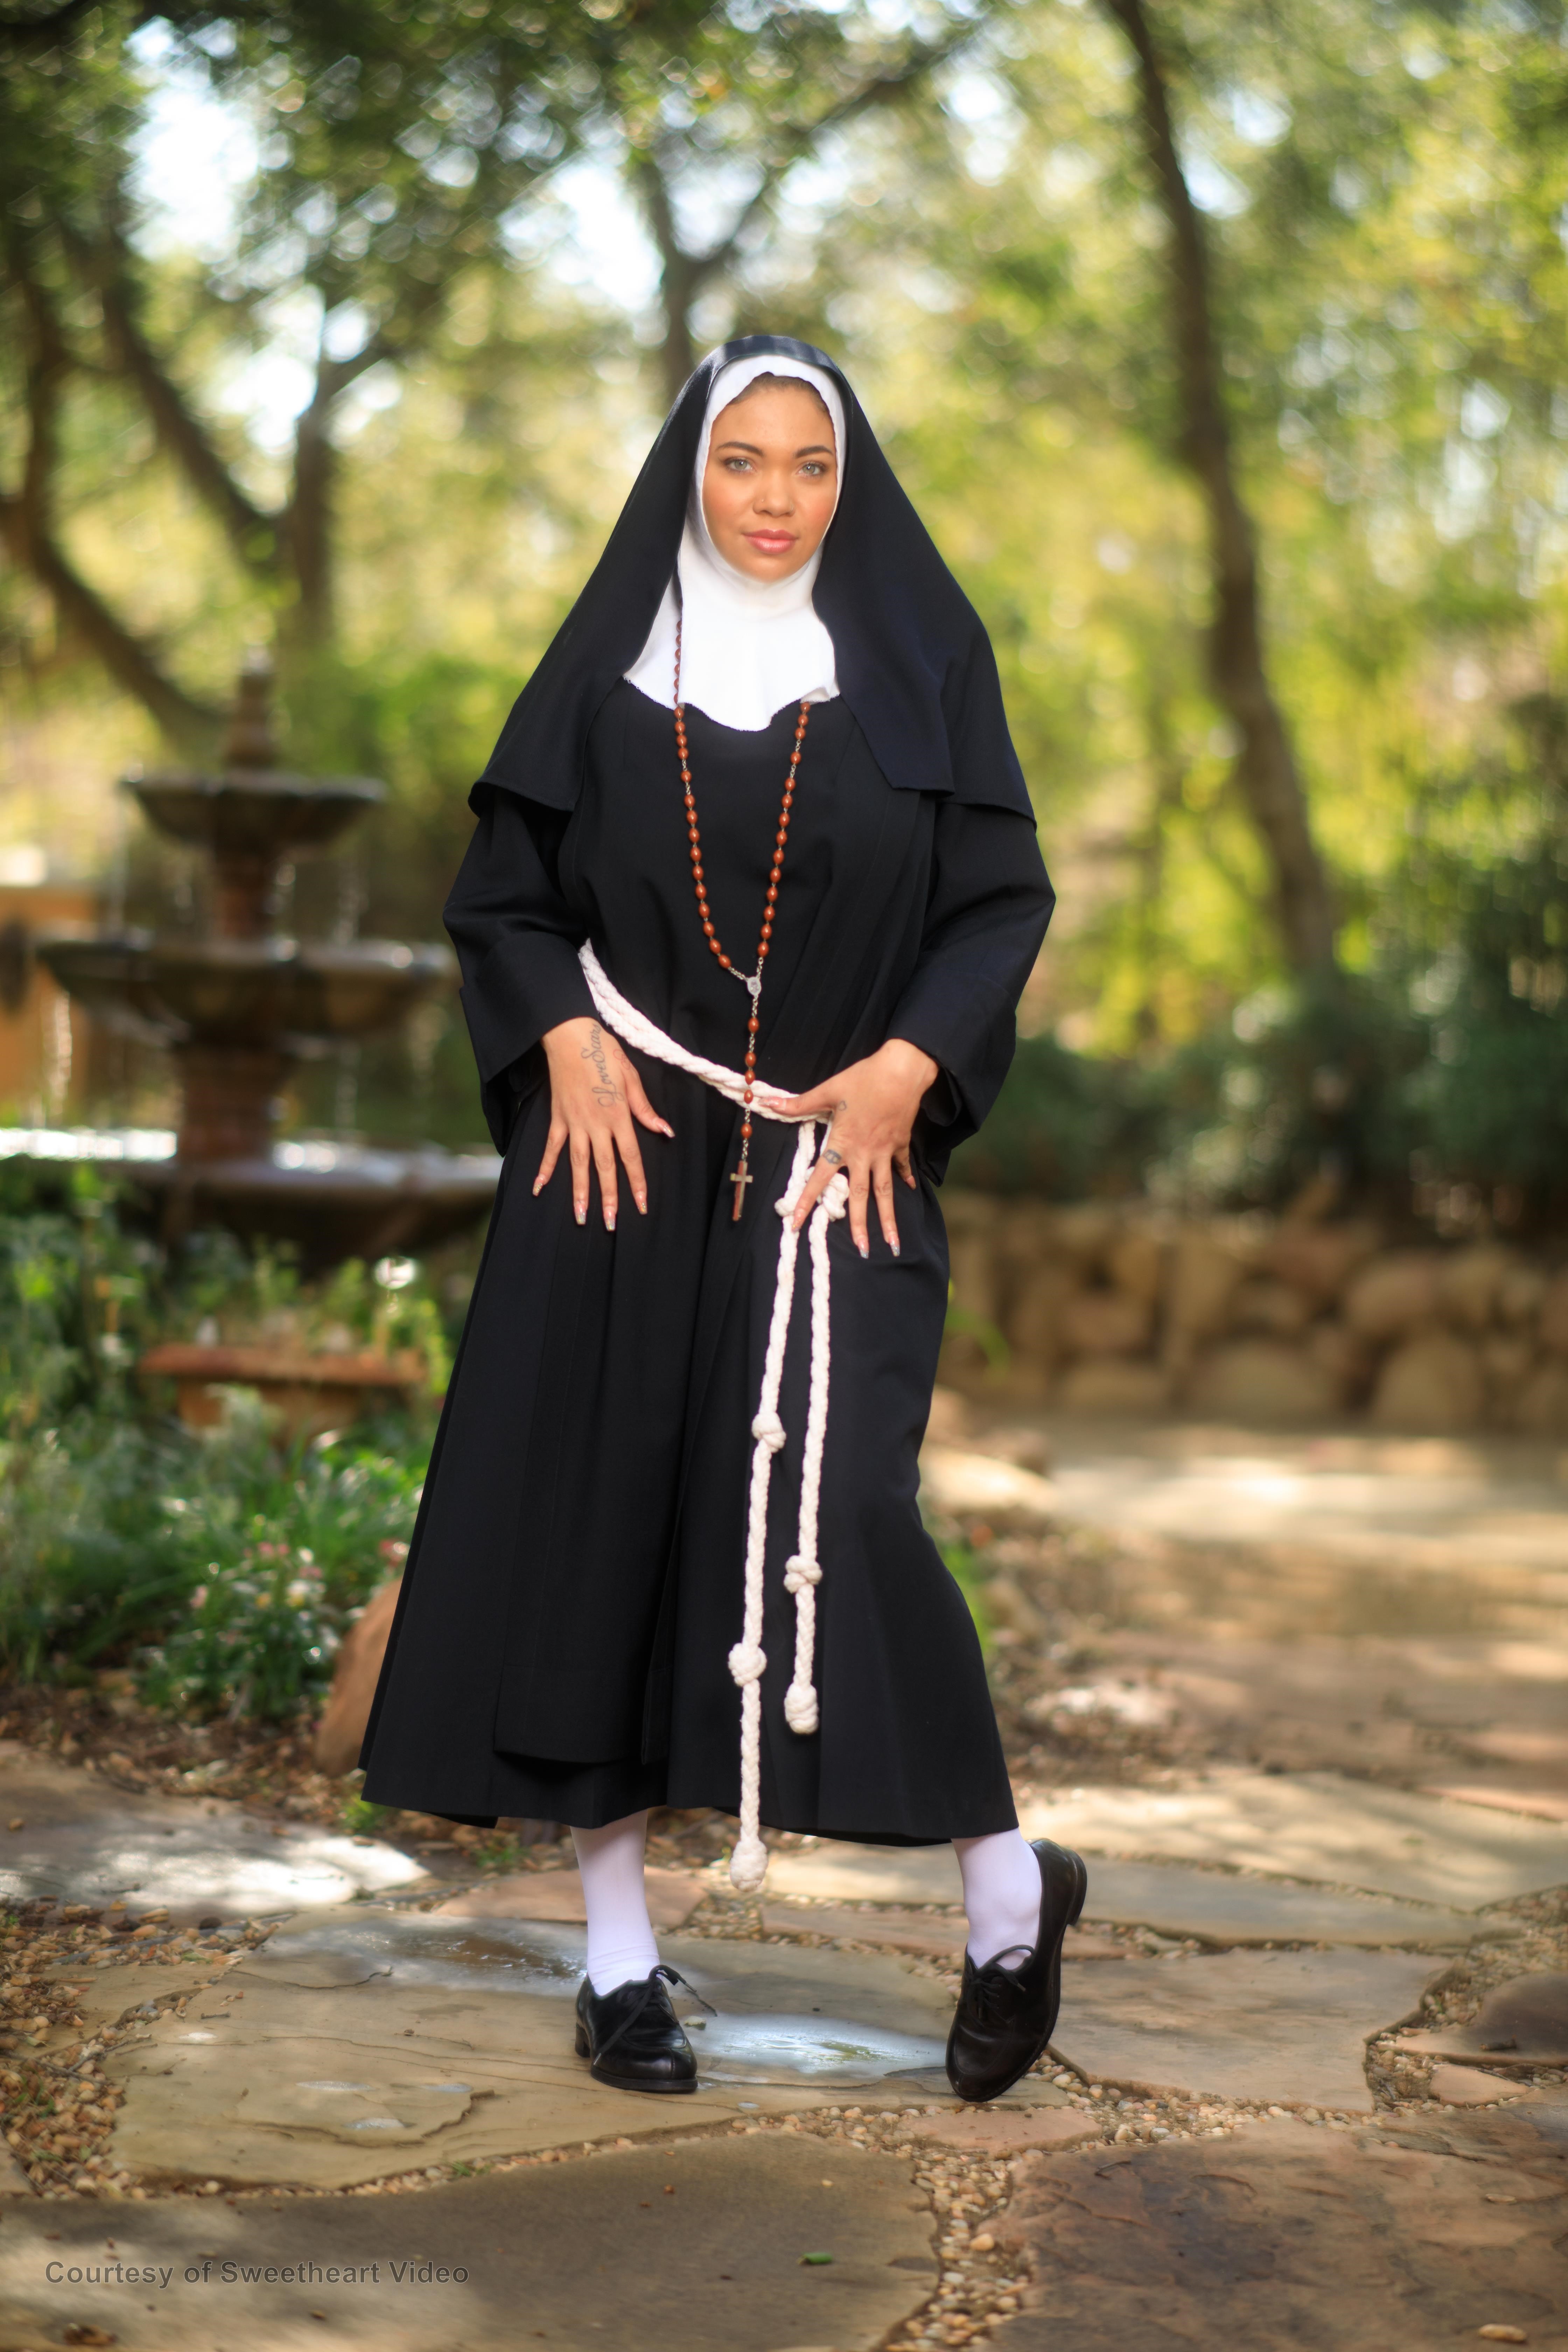 Confessions Of A Sinful Nun Vol 2 The Rise Of Sister Mona